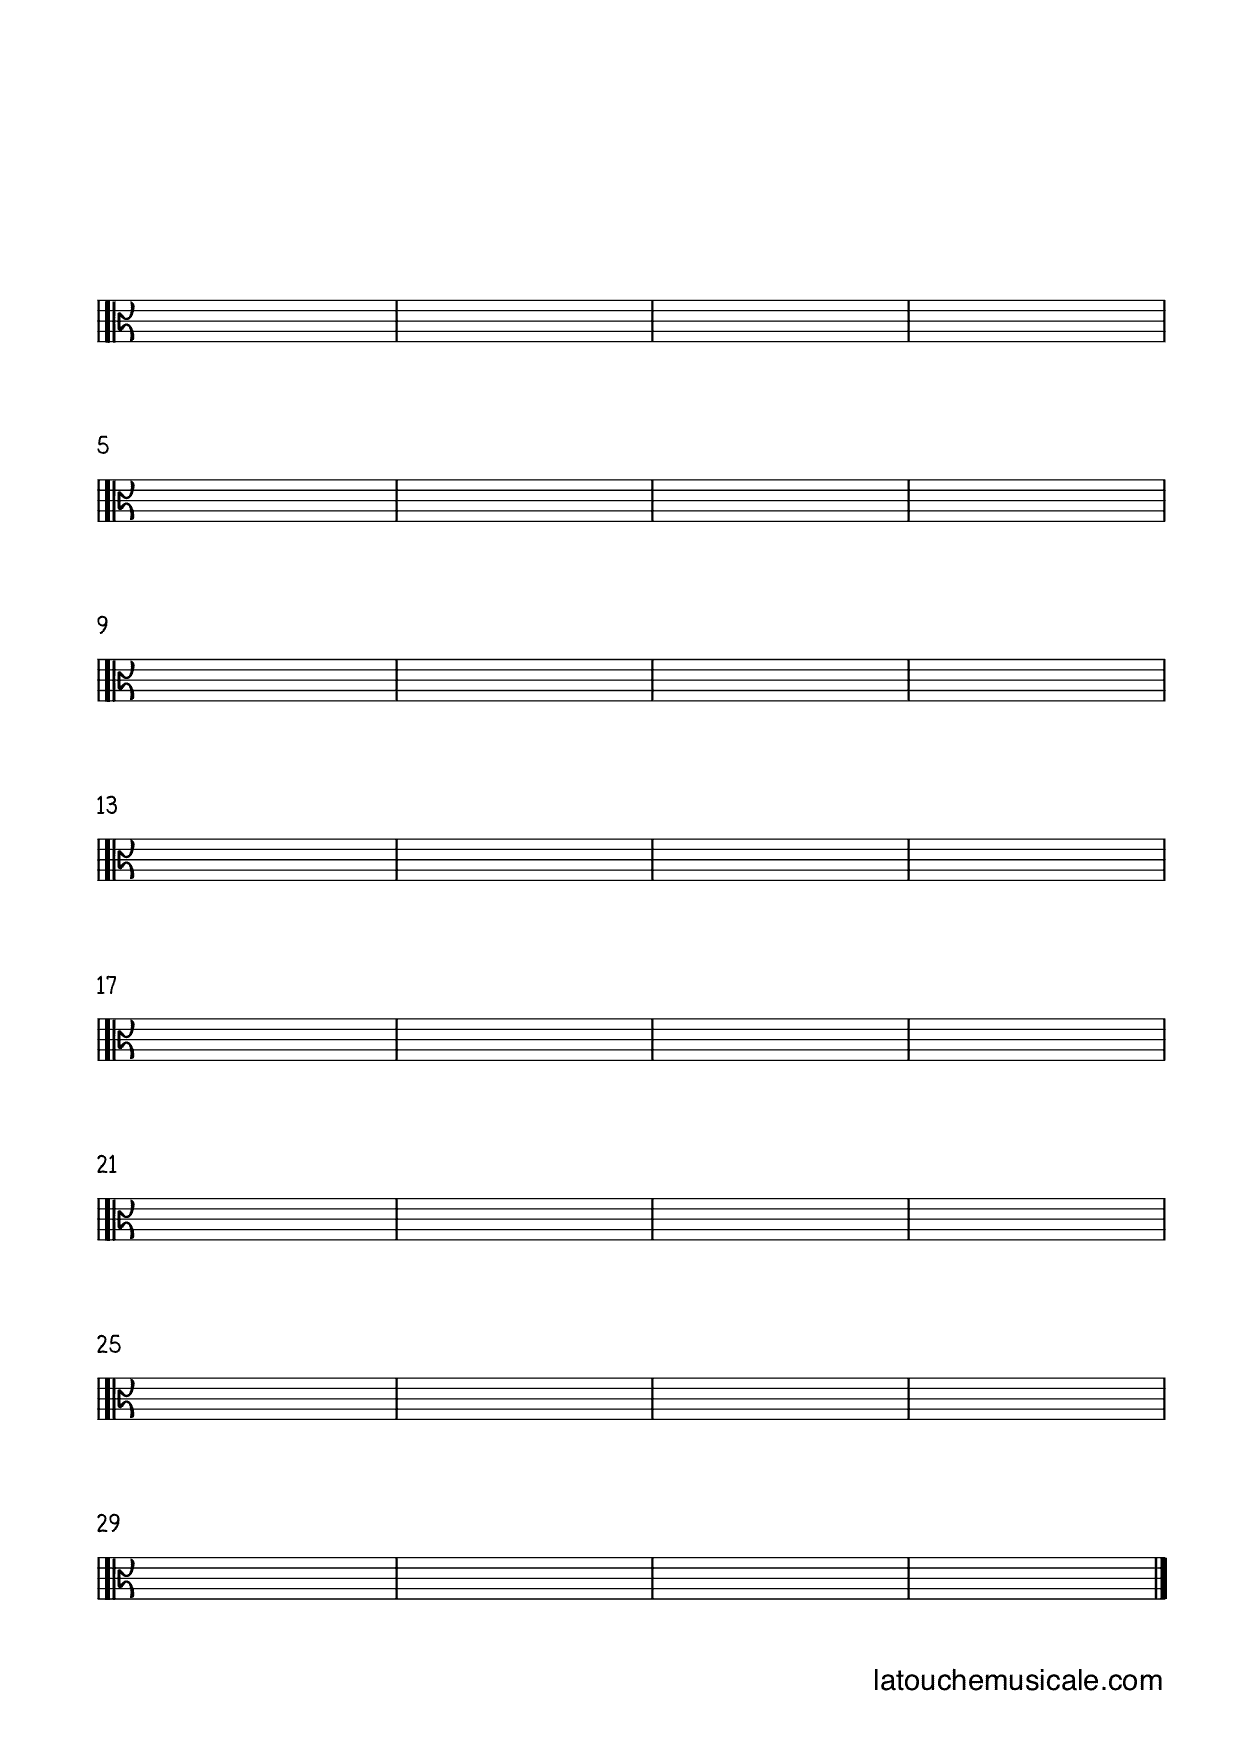 free-blank-sheet-music-to-download-in-pdf-la-touche-musicale